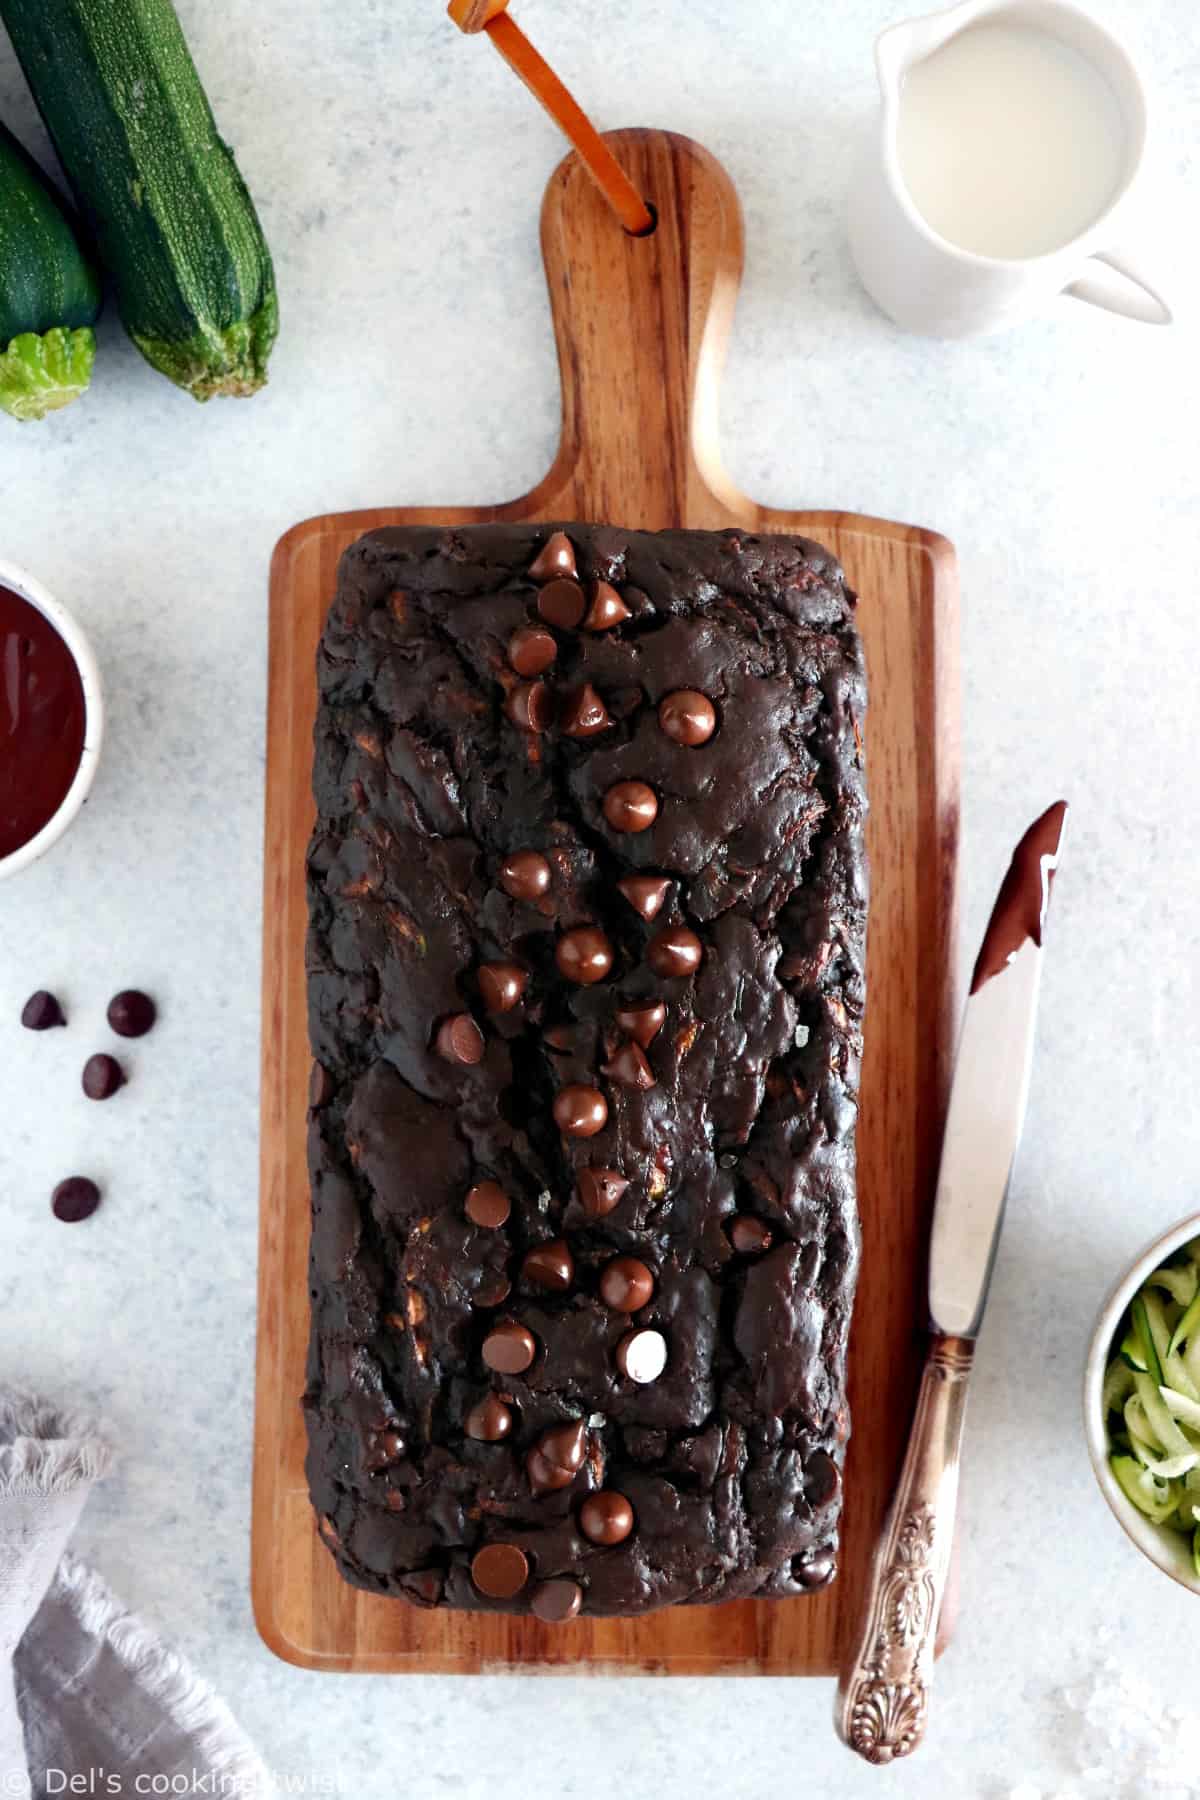 You will fall in love with this healthy chocolate zucchini bread recipe. Super easy to make, it is naturally sweetened with applesauce and it has a rich and irresistible moist texture.